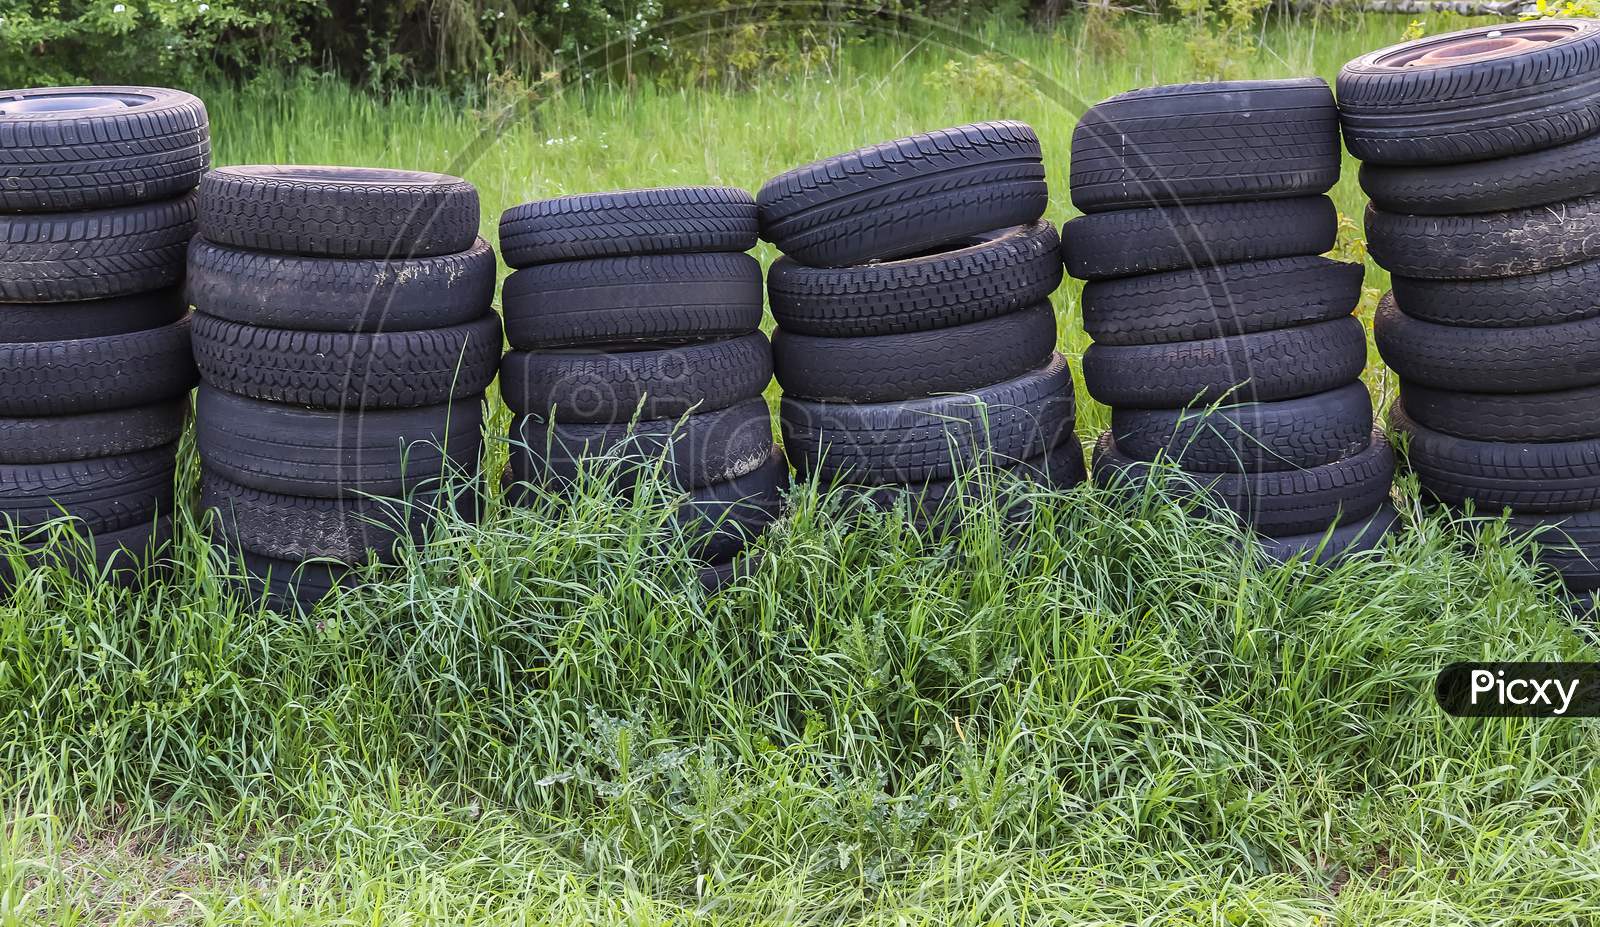 Damaged and worn old black tires on a stack. Tire tread problems. Solutions concept. Tire tread problems.